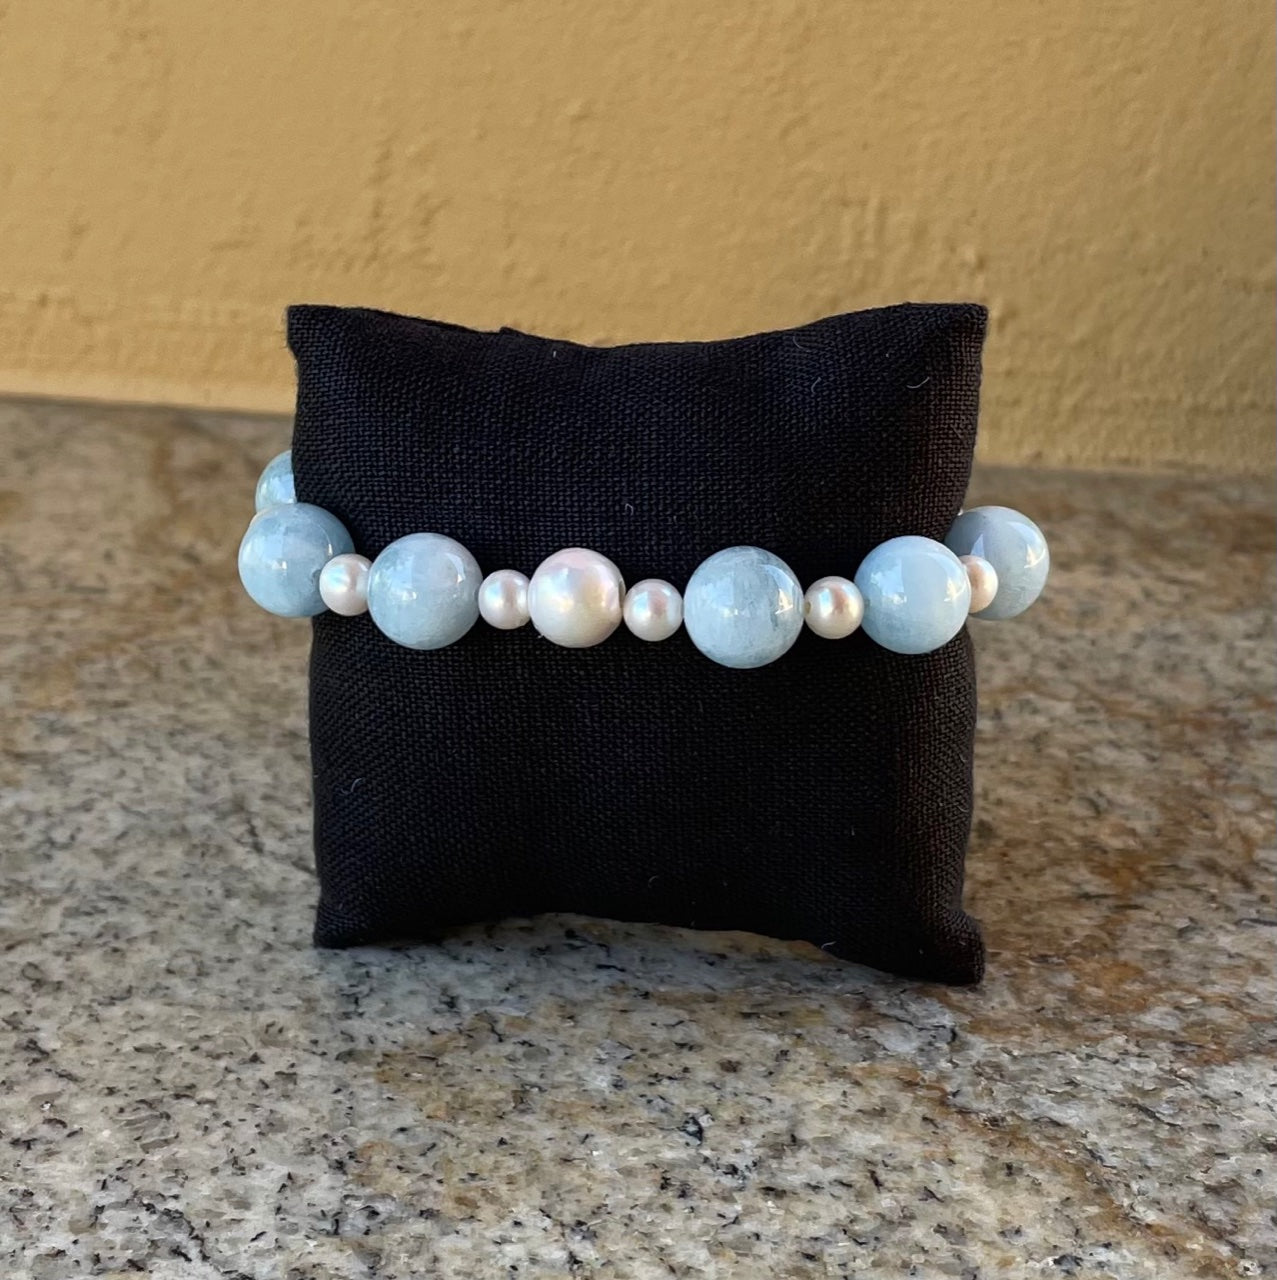 Bracelet - stretch bracelet with 14mm aquamarine beads and 4mm white pearls